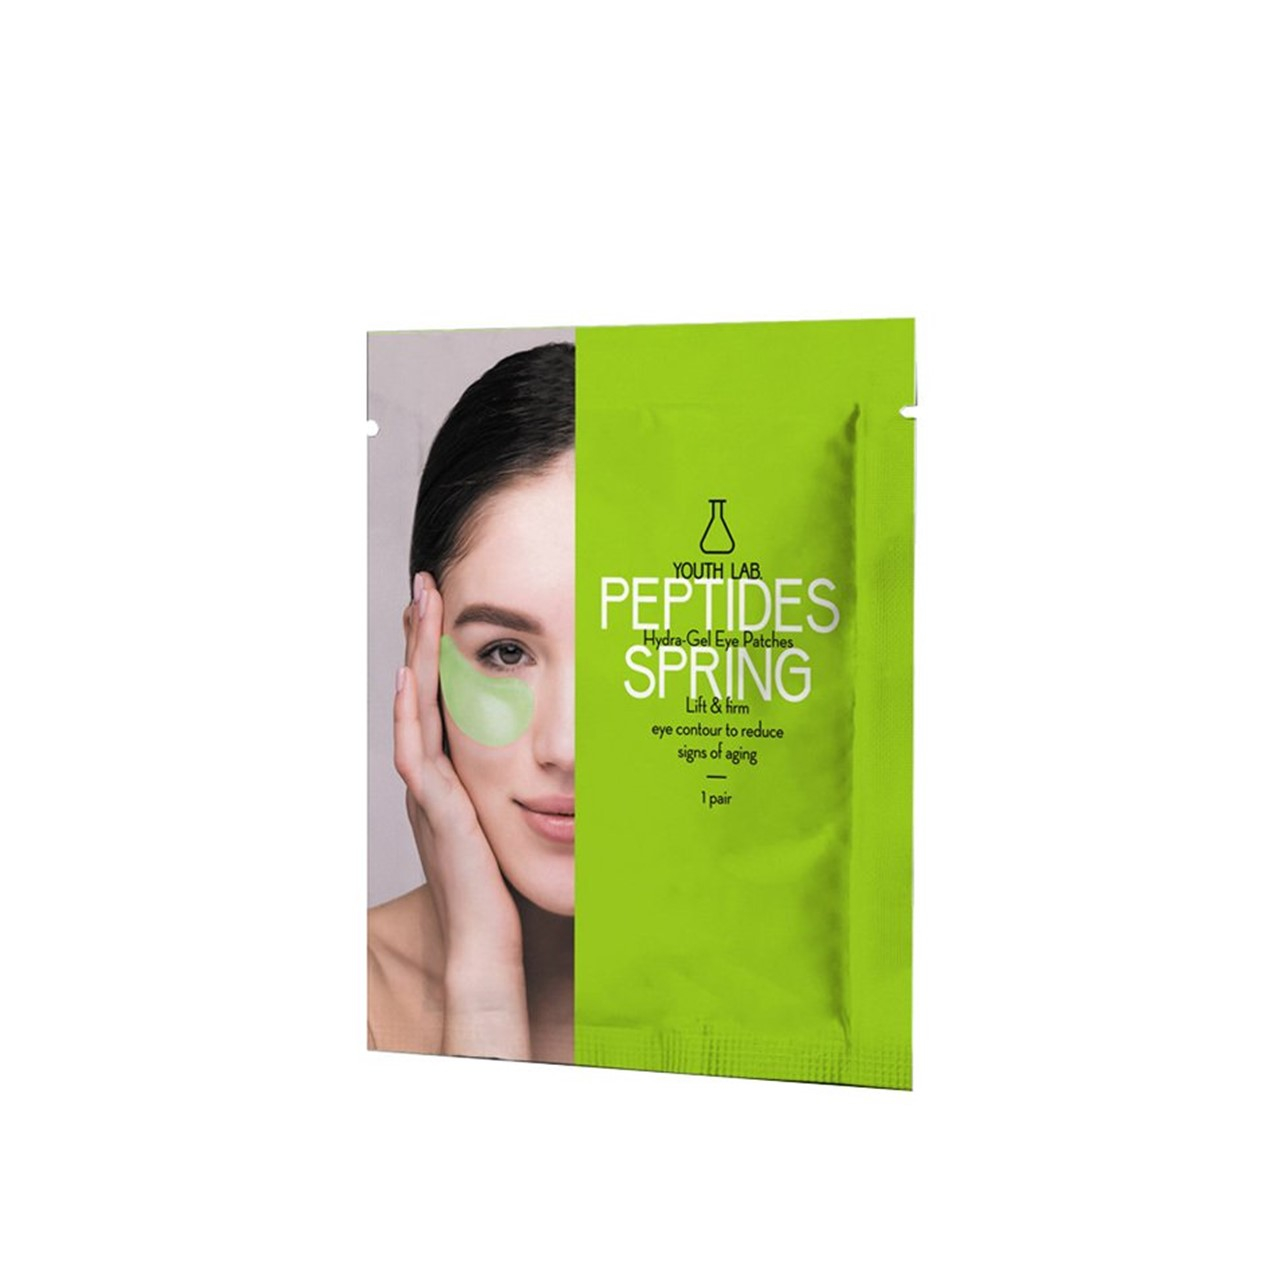 YOUTH LAB Peptides Spring Hydra-Gel Eye Patches x1 Pair